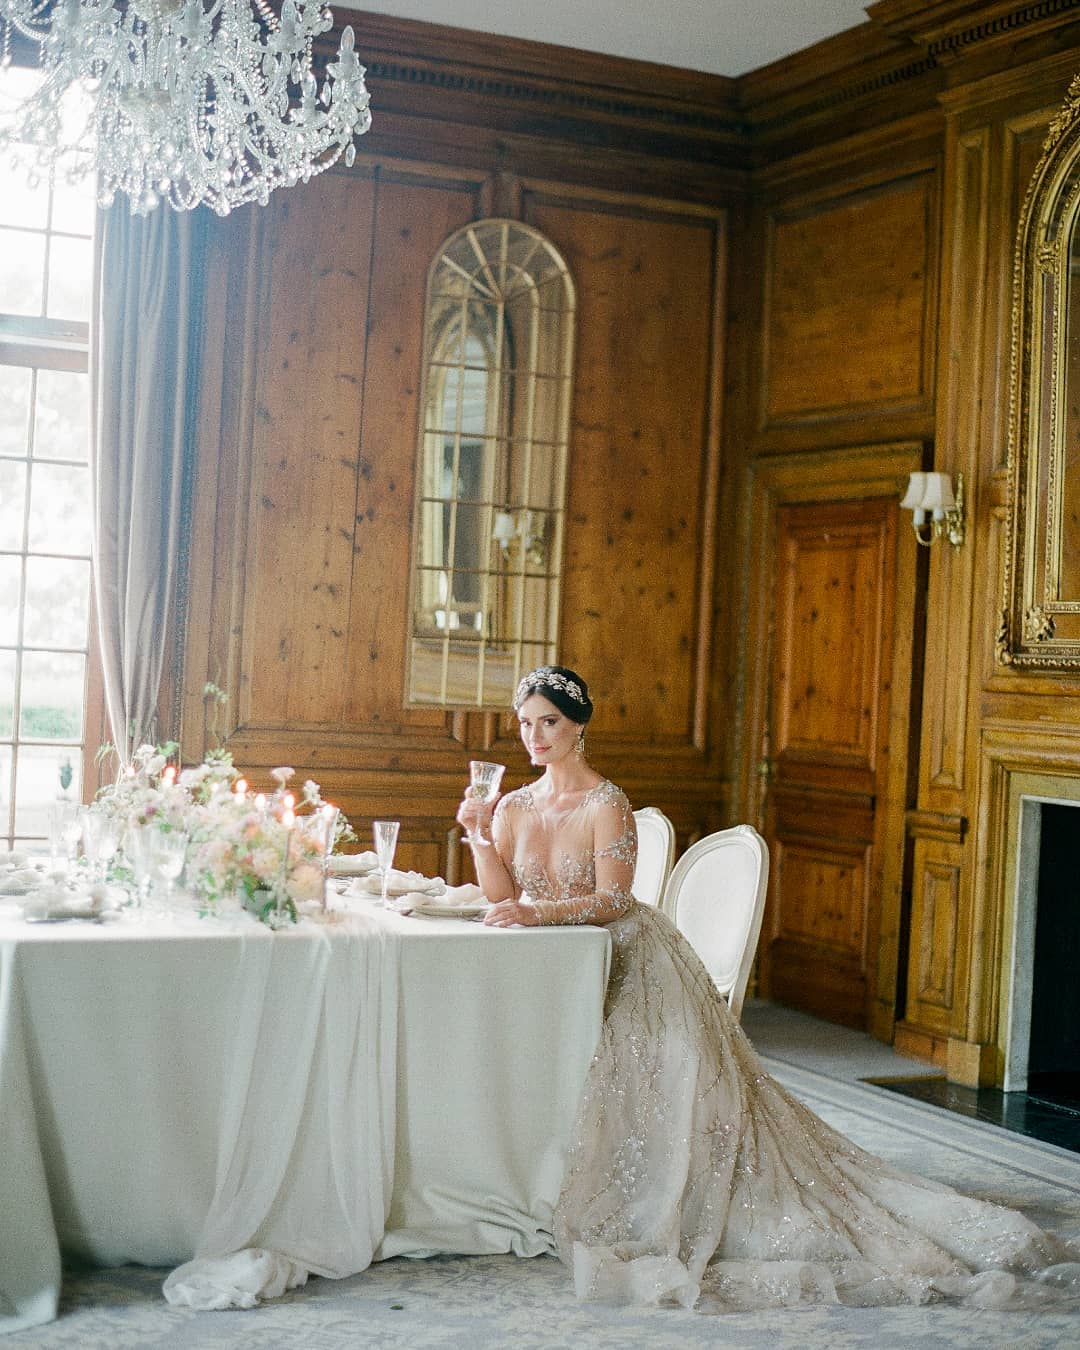 English manor house ballroom wedding reception with elegant tablescape and pastel centerpieces, plus a bride in a haute couture Lee Petra Grebenau wedding dress with crystal vine embellishments; captured by Julie Livingston at Hedsor House with styling from Willow and Oak Events